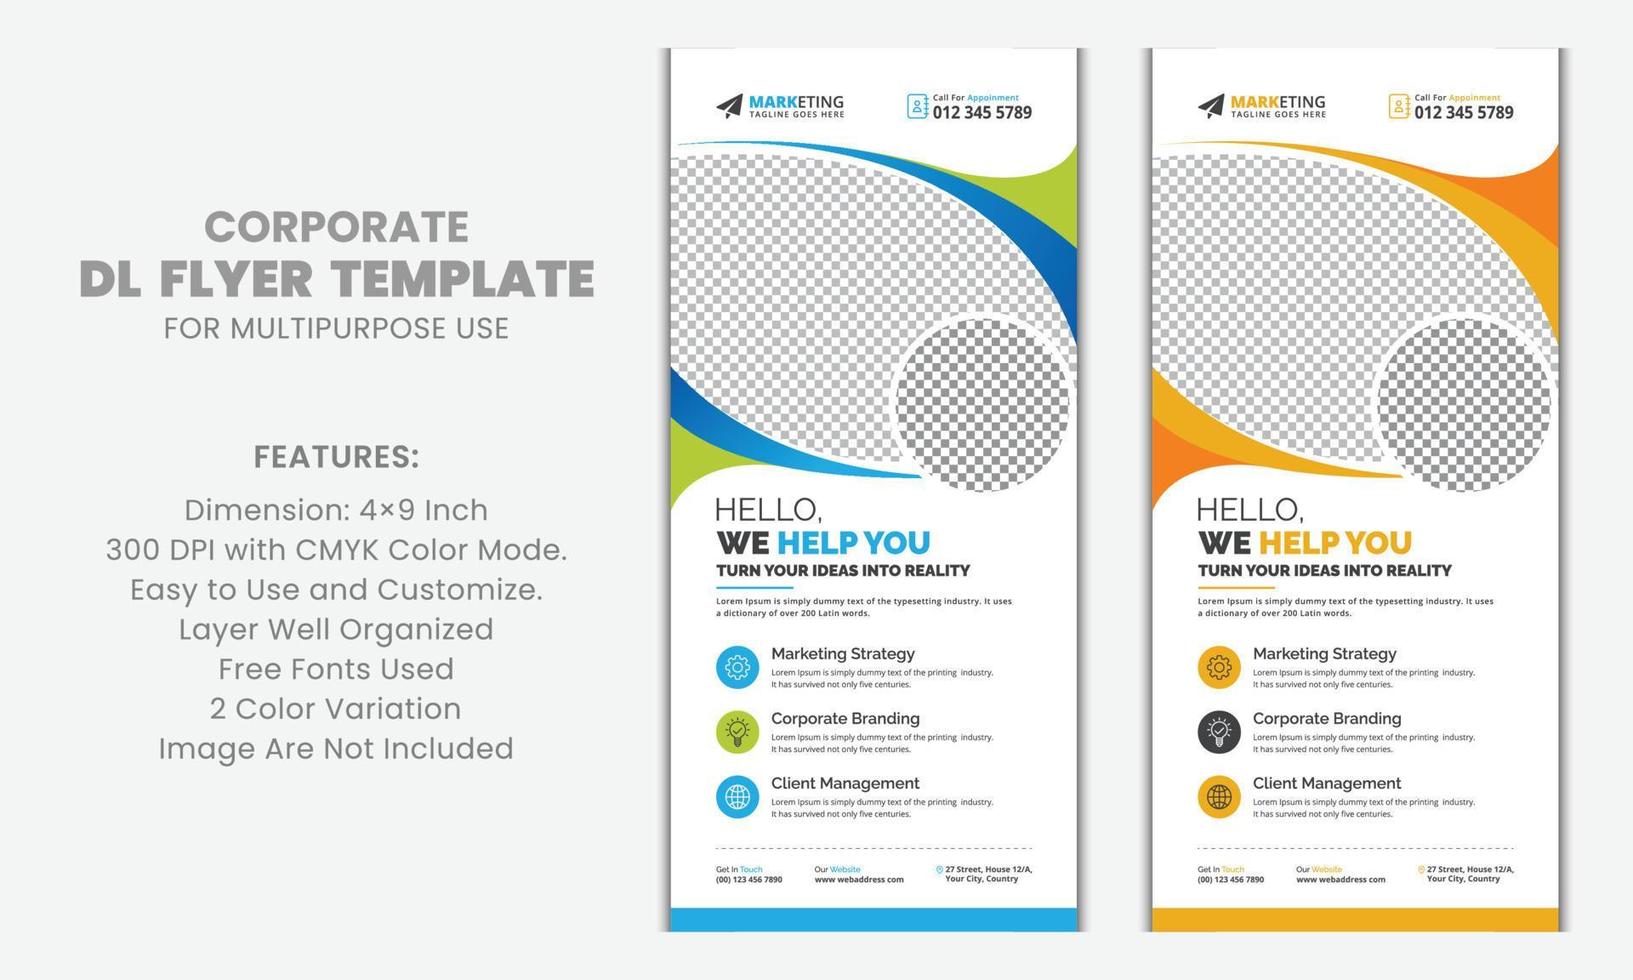 Blue, Yellow Color Modern Clean Standard Corporate DL Flyer Rack Card Template Design for Business, Marketing, Advertisement and Multipurpose Use vector